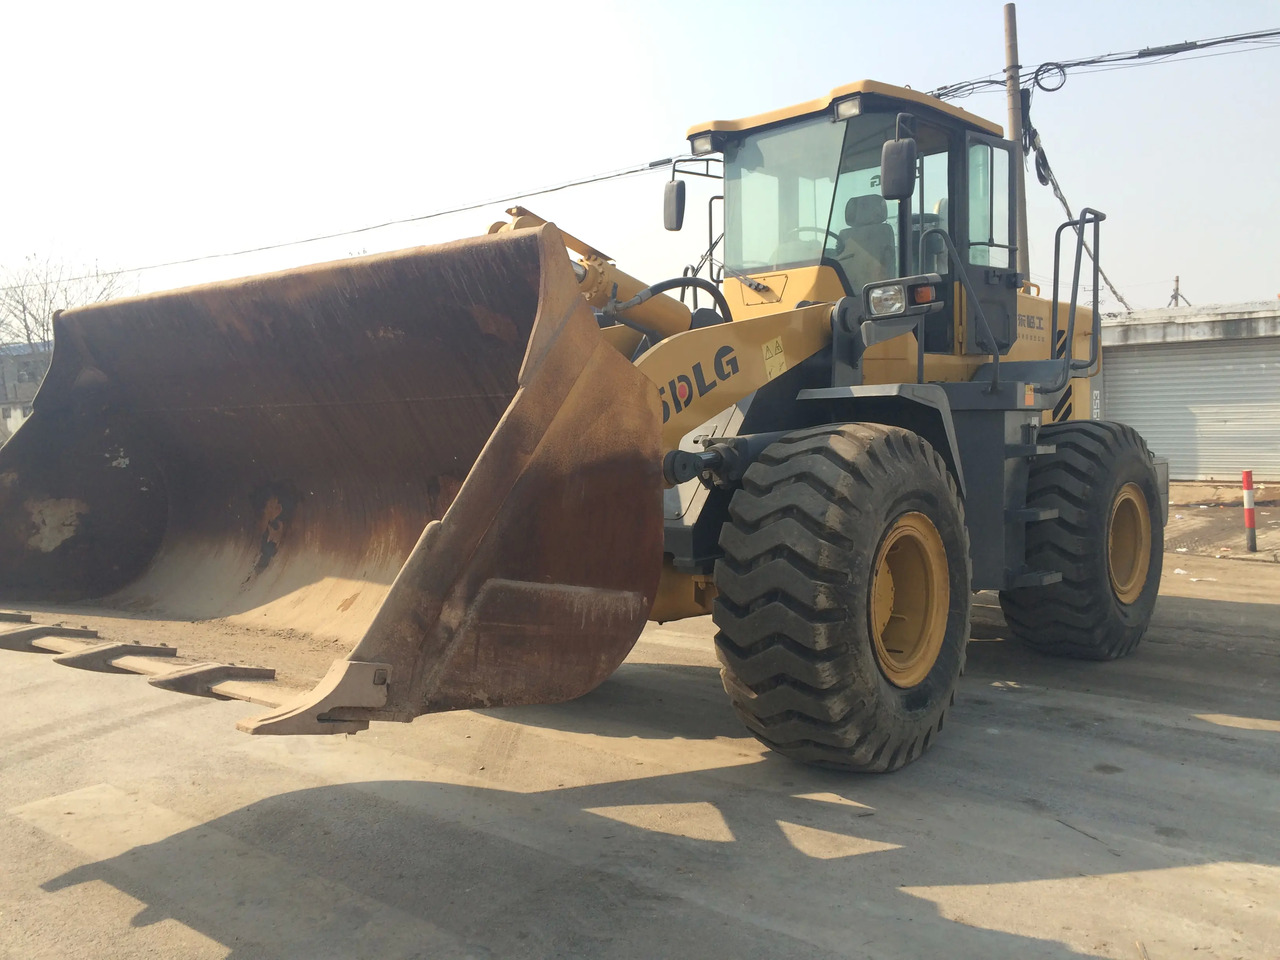 Wiellader 5 ton mini Used Original State loader SDLG 953 Used Small  wheel loader in good condition